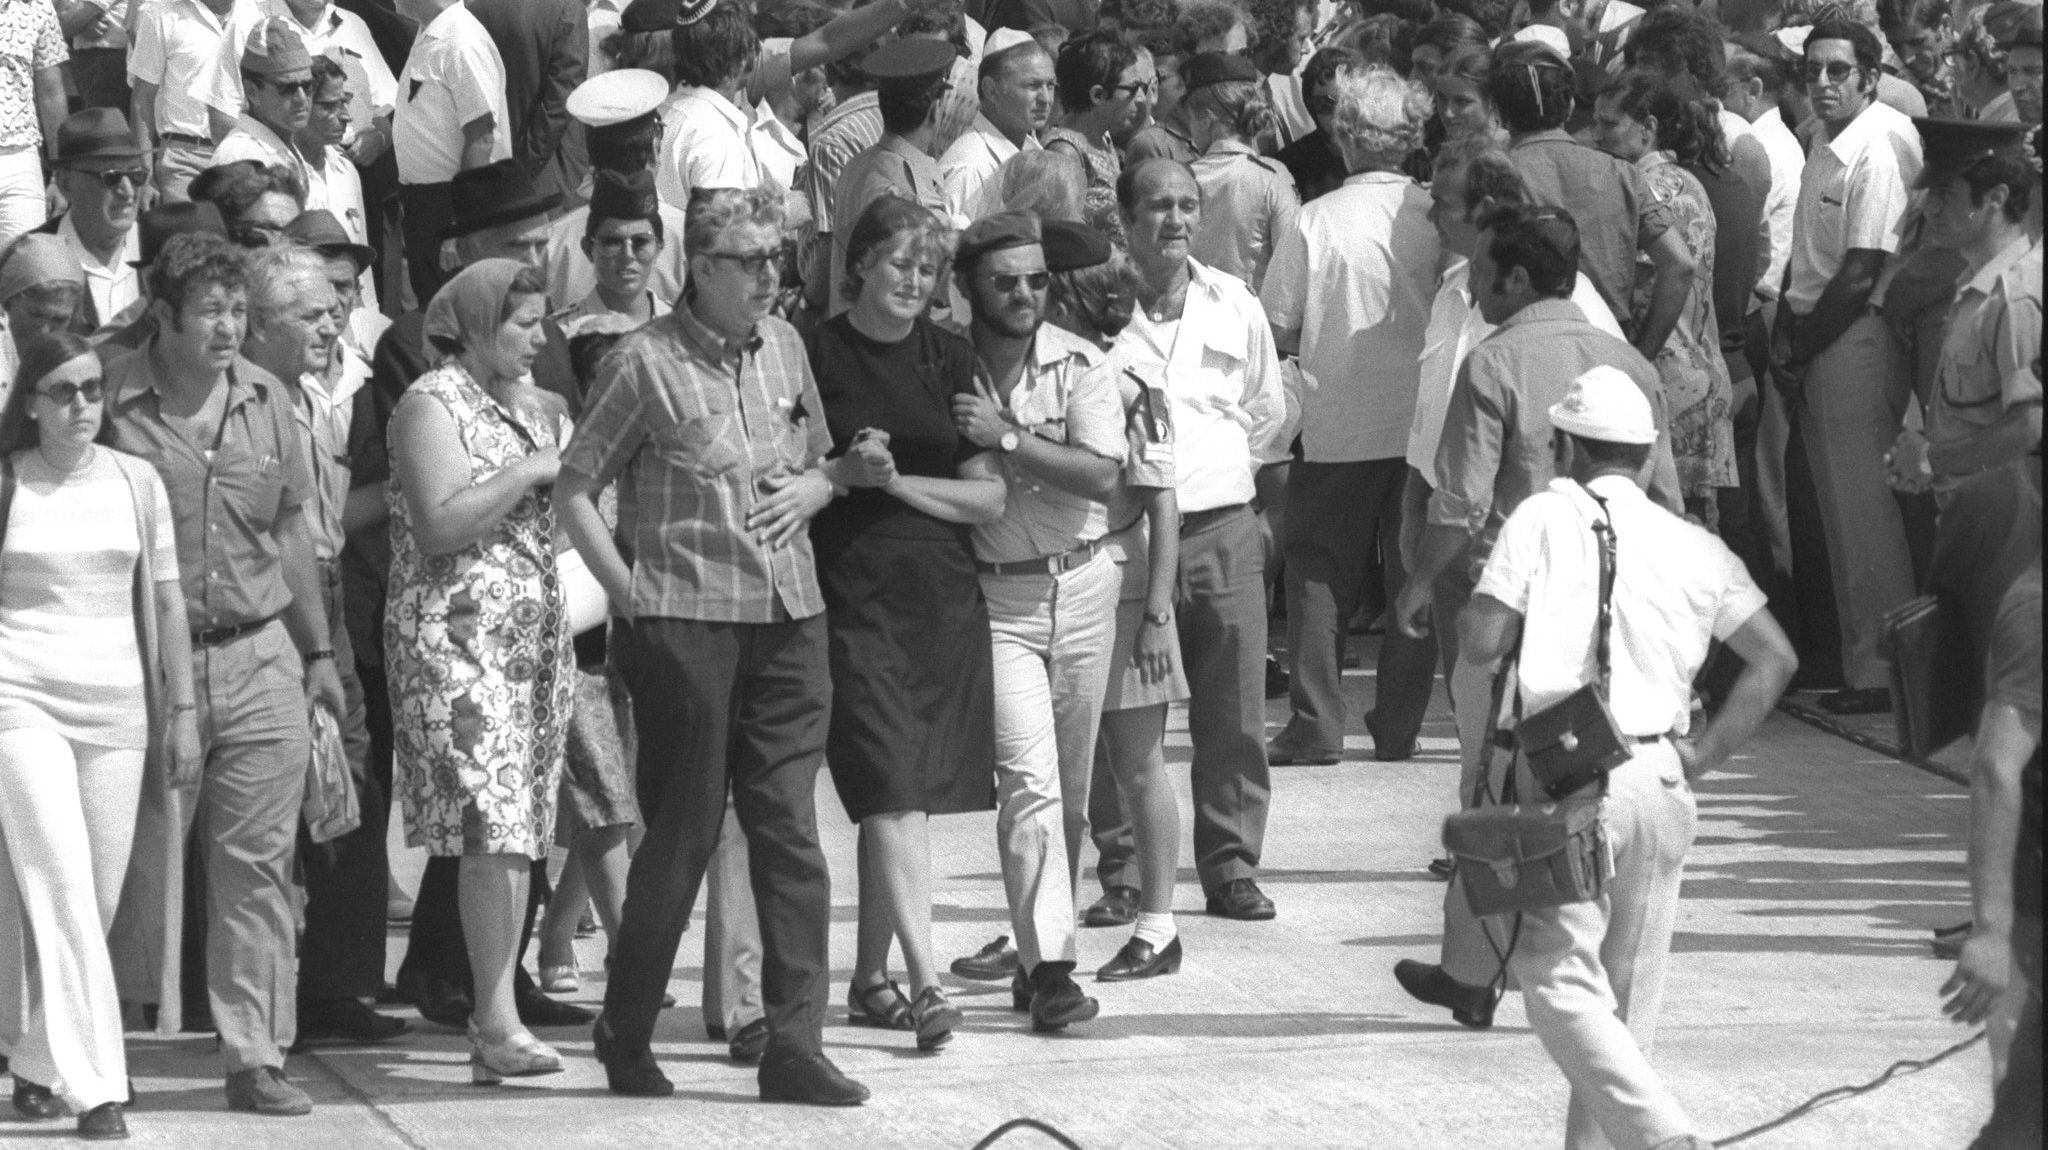 Israel, Germany Reach Compensation Deal Over 1972 Munich Olympics Massacre